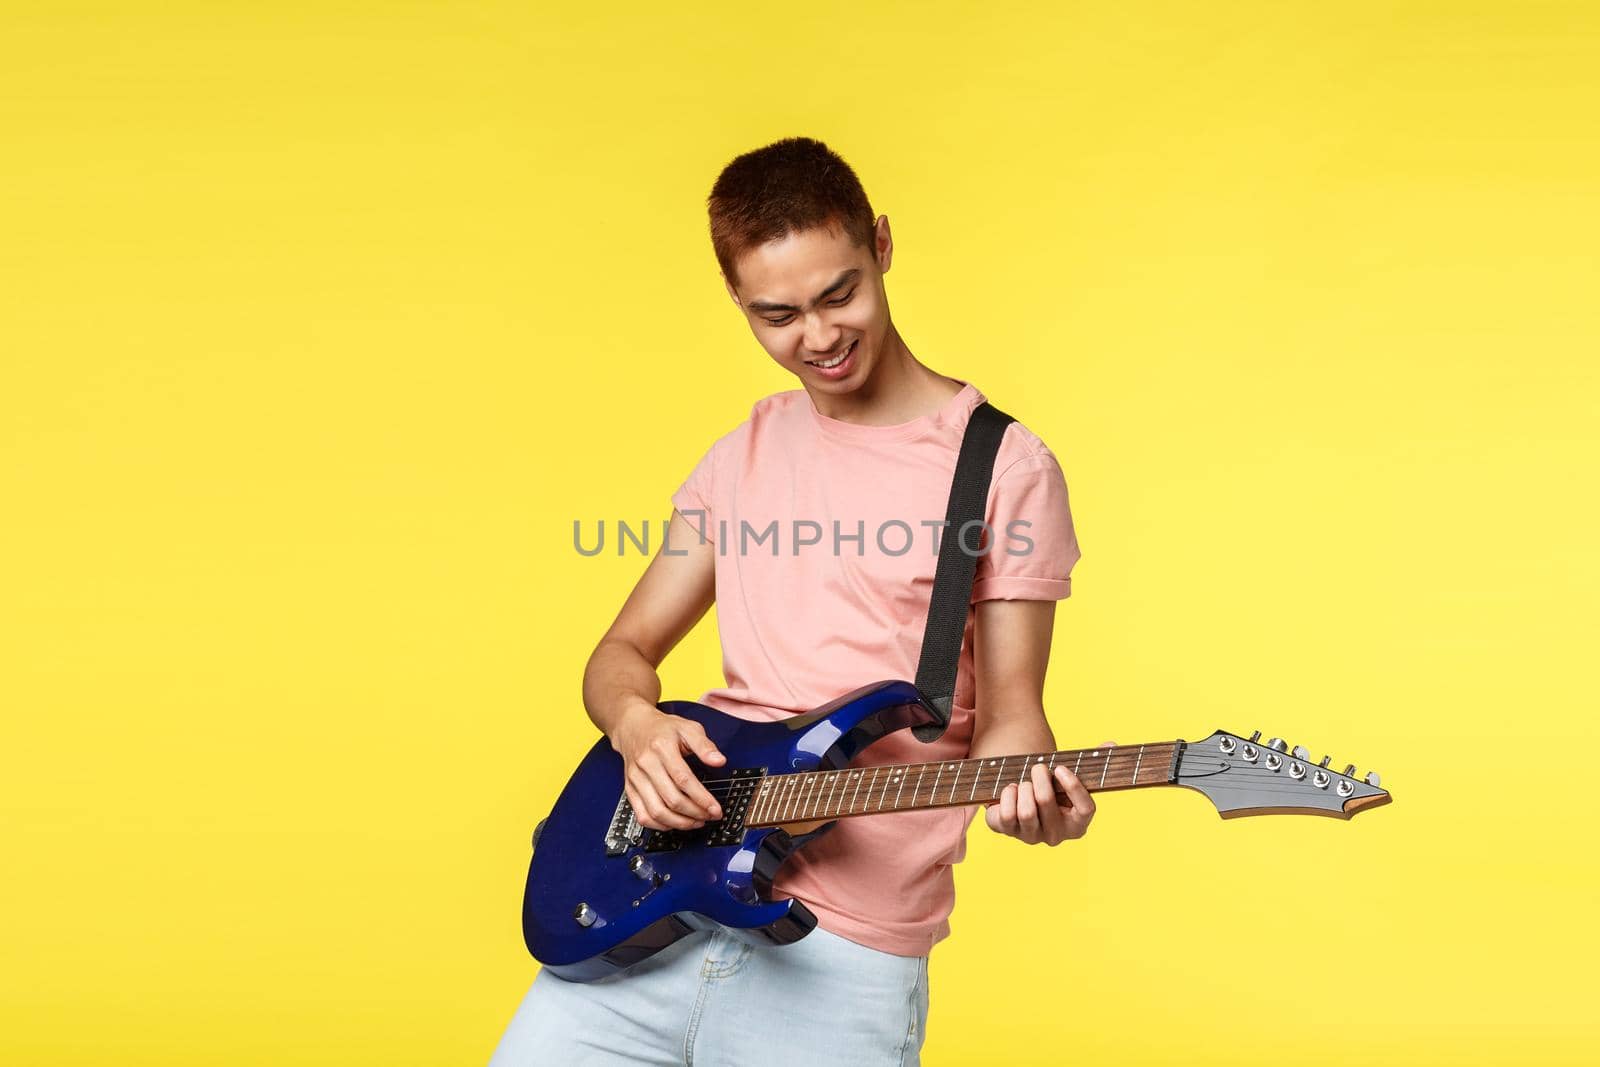 Lifestyle, leisure and youth concept. Portrait of happy, cool and stylish asian guy playing in band, enjoying perfoming on electric guitar, smiling enthusiastic, standing yellow background.